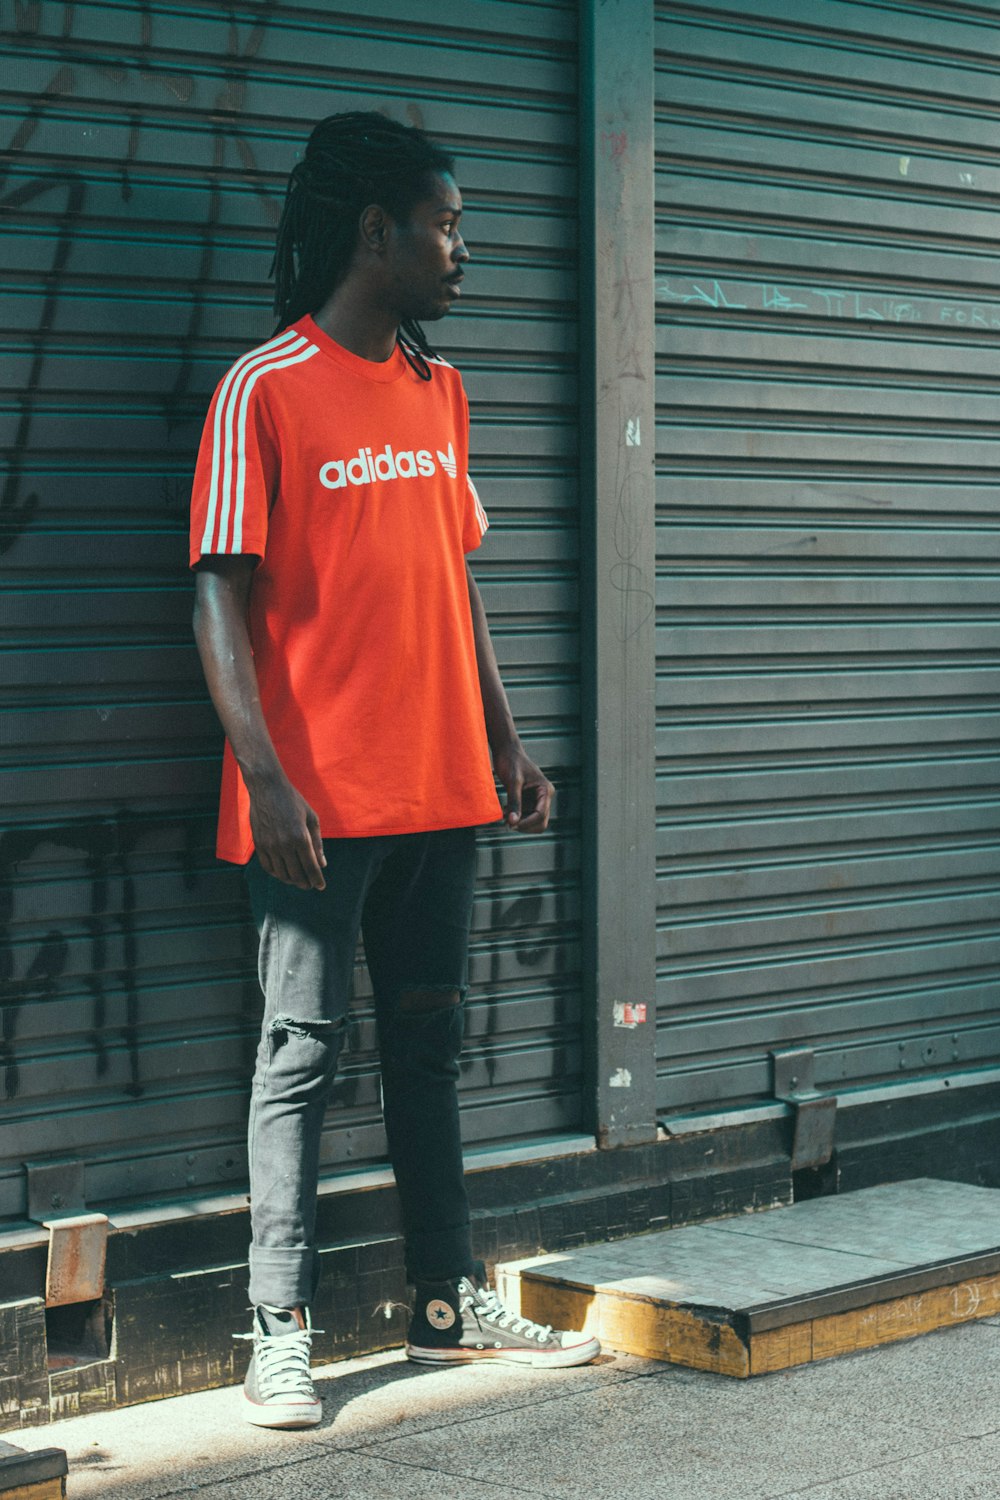 man wearing red Adidas t-shirt in front of roller shutter